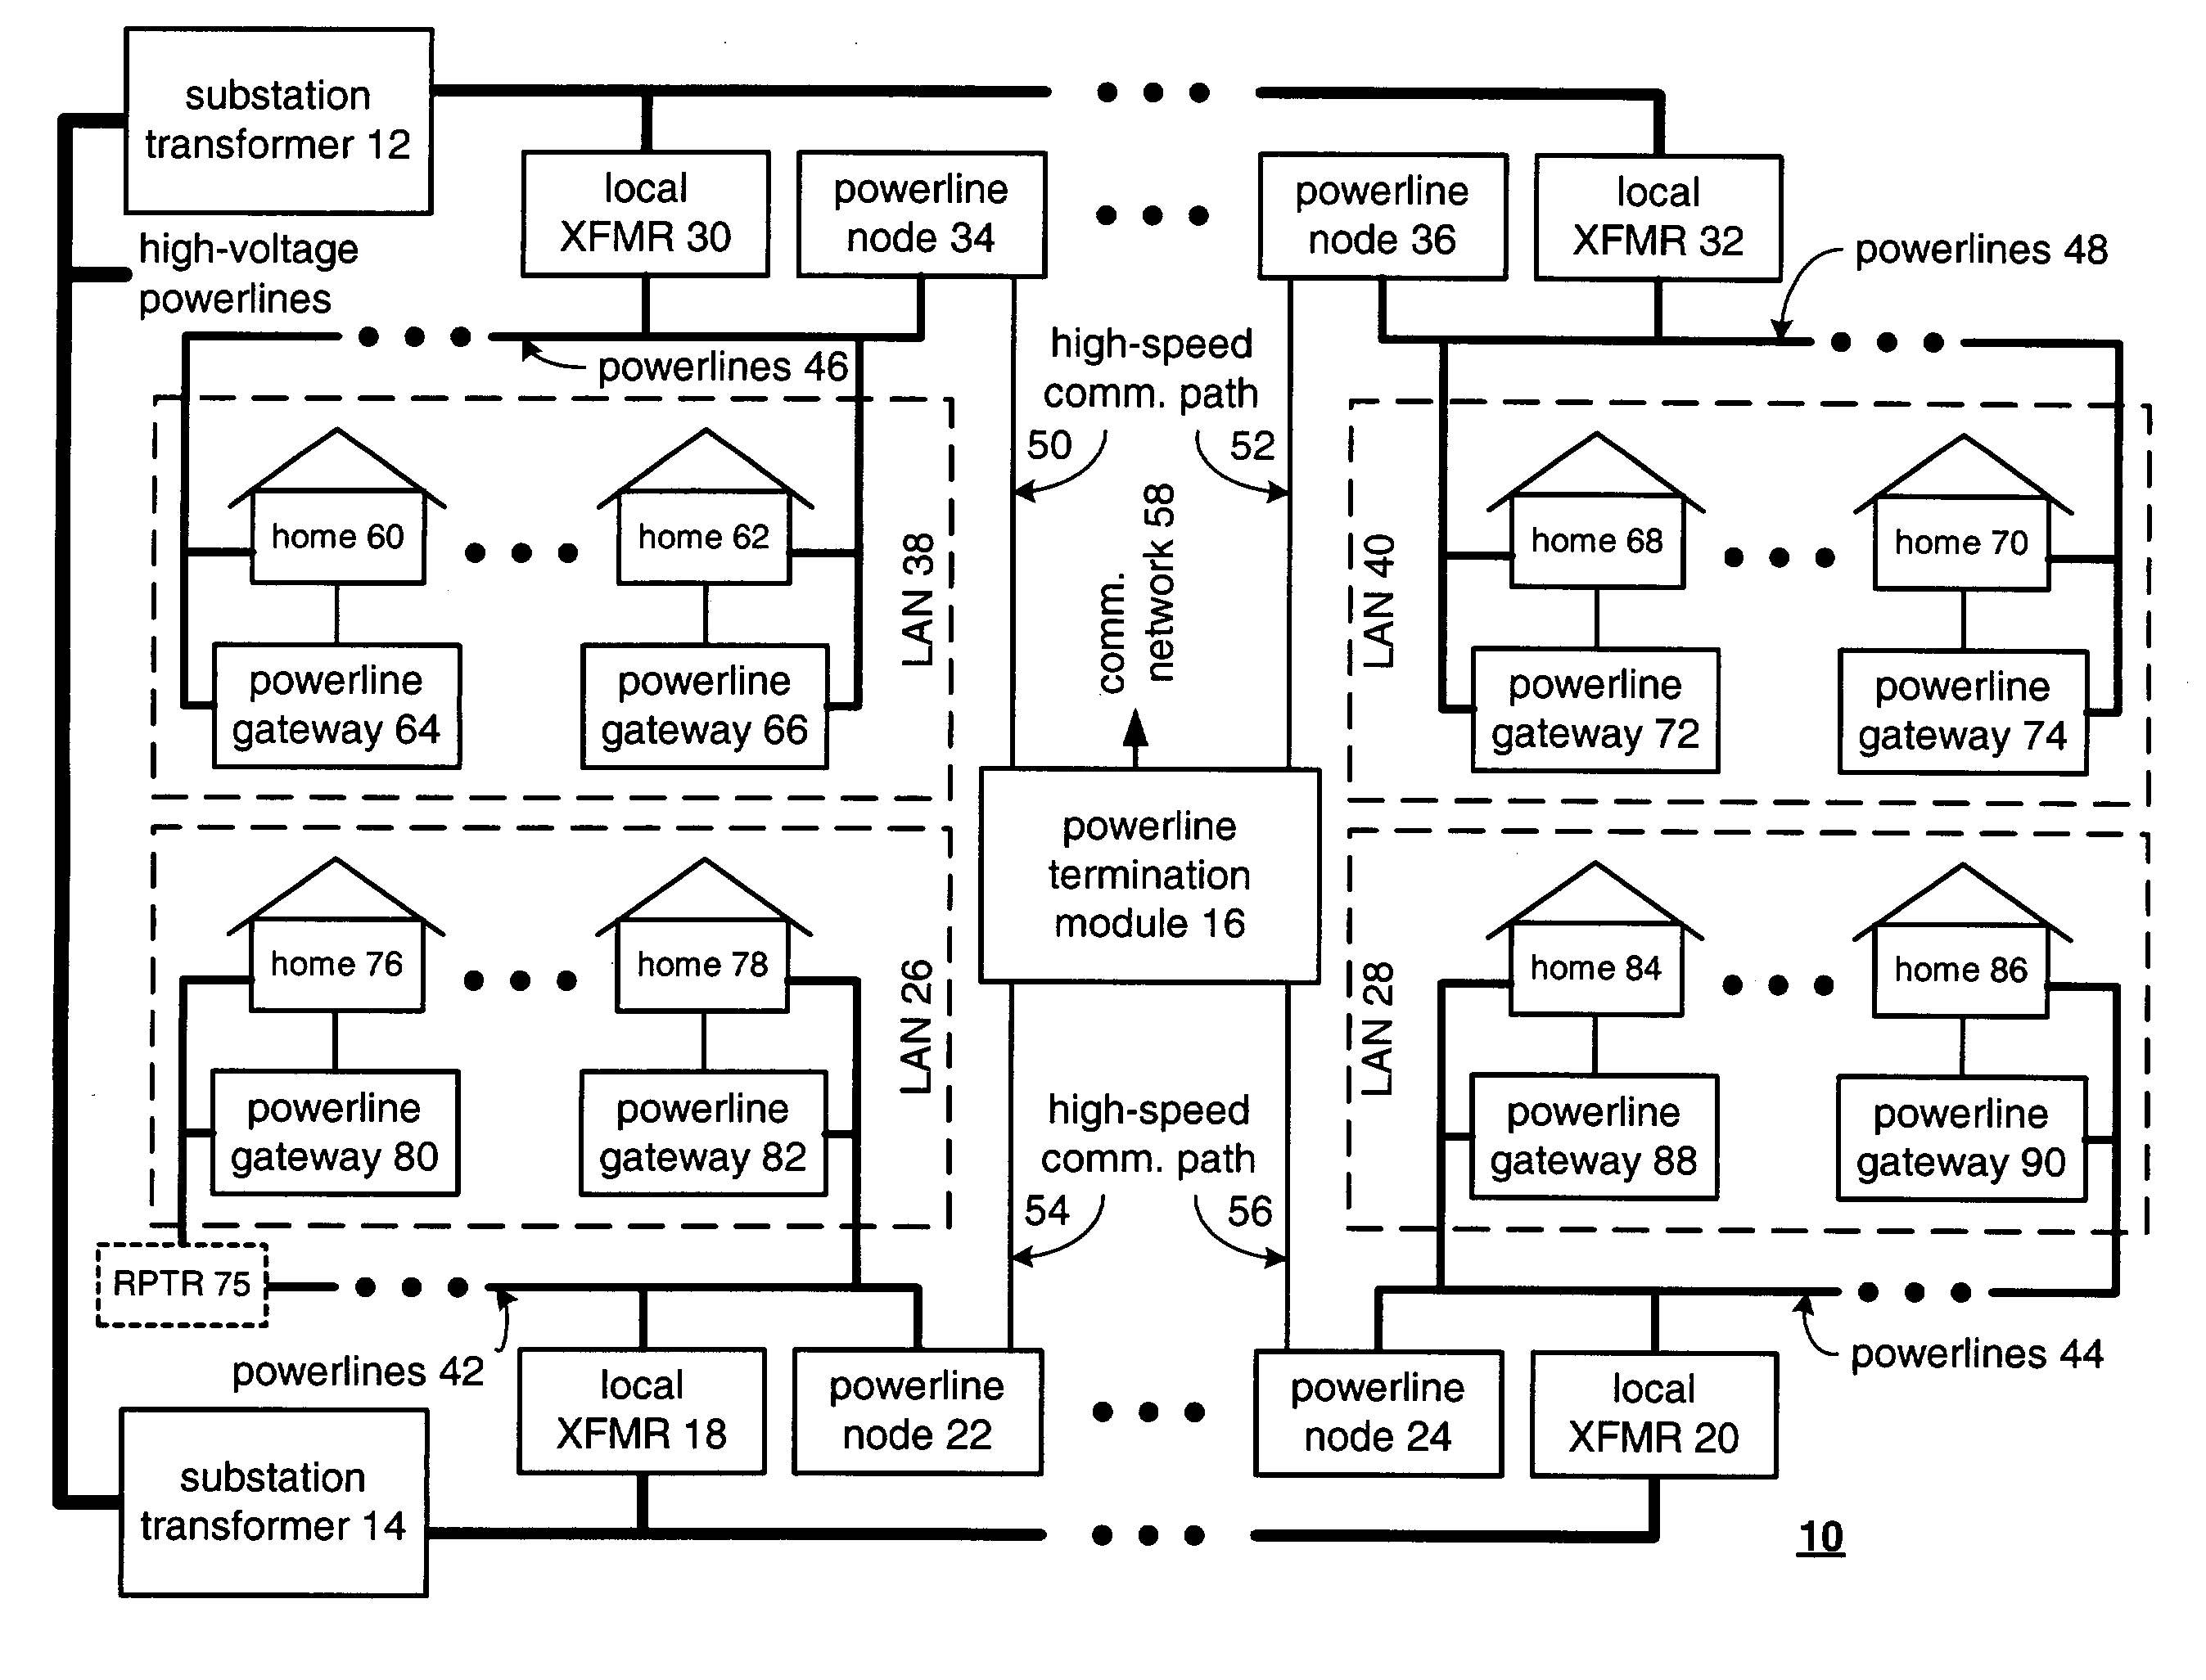 Last leg power grid high-speed data transmitter and receiver structures